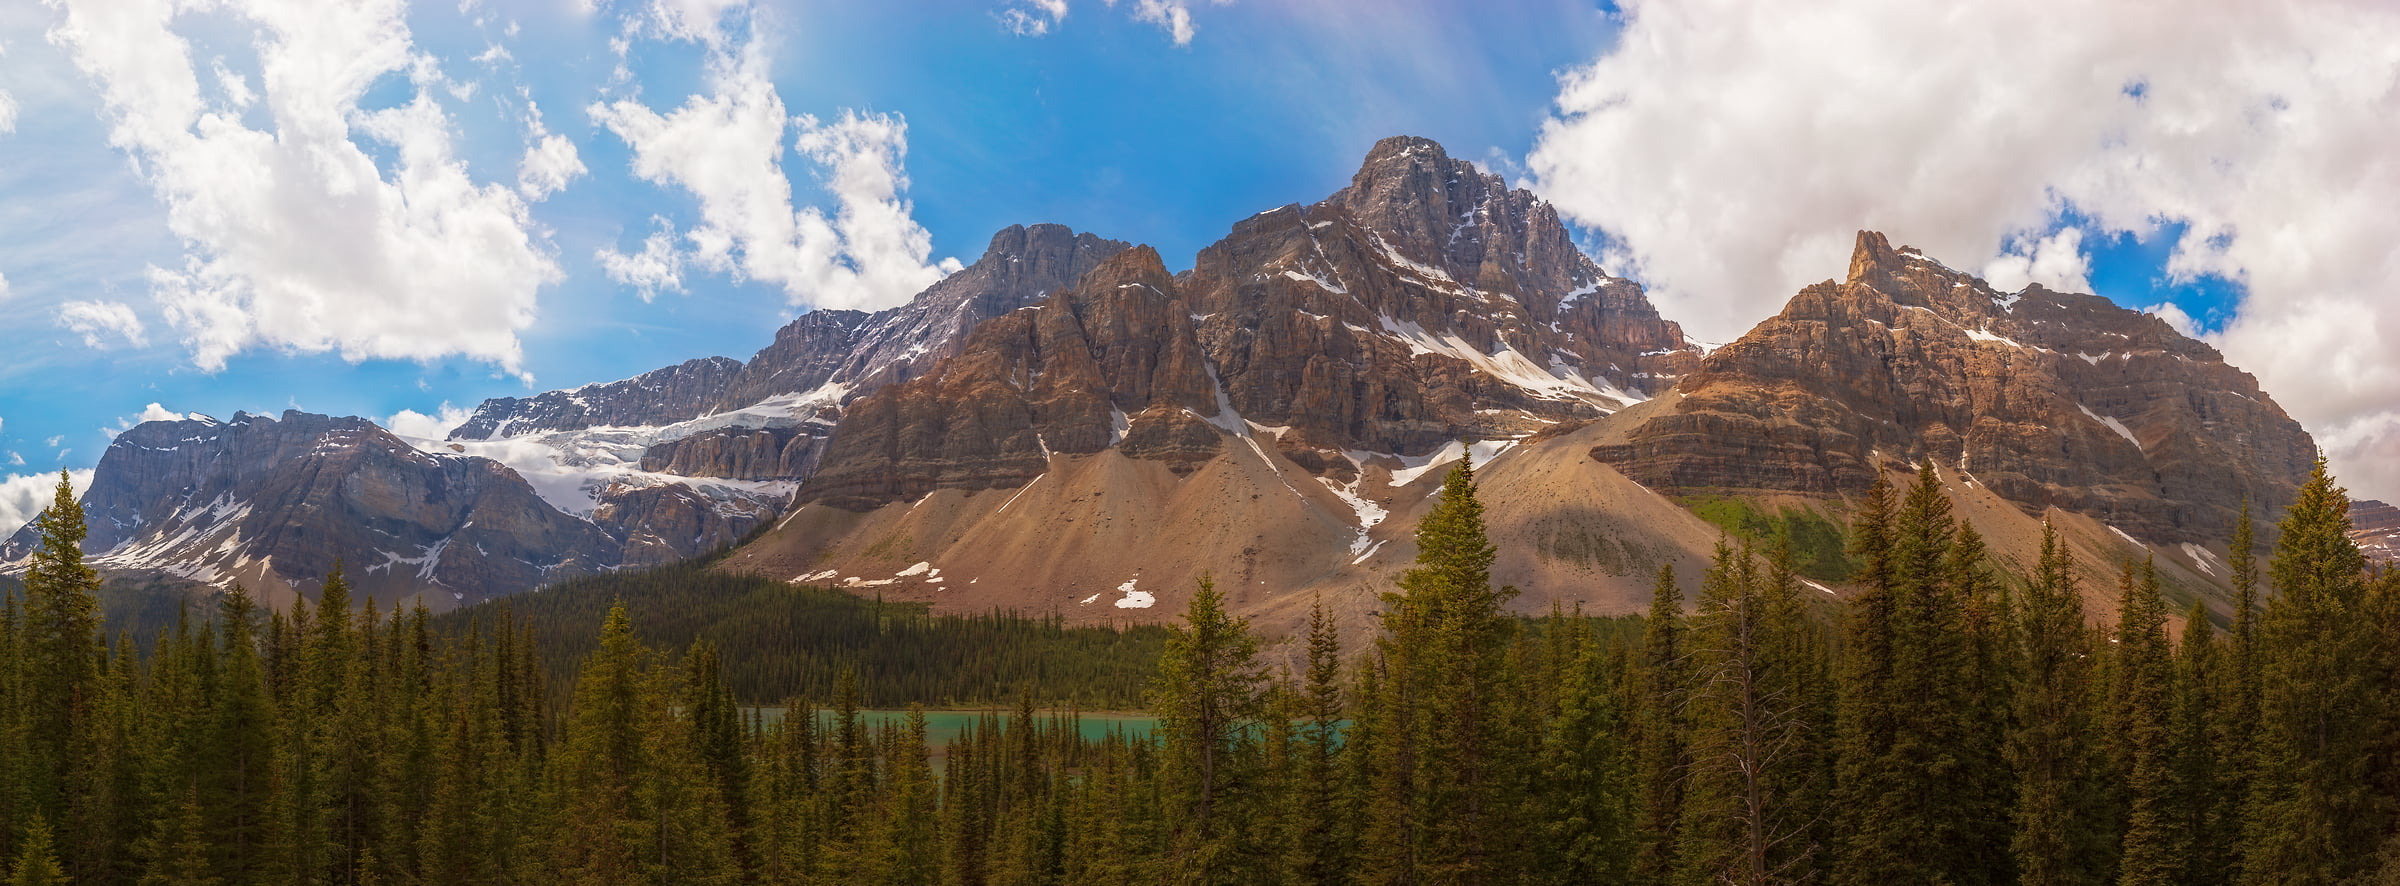 2,246 megapixels! A very high resolution, landscape wallpaper photo of a mountain range; photograph created by John Freeman in Banff National Park, Alberta, Canada